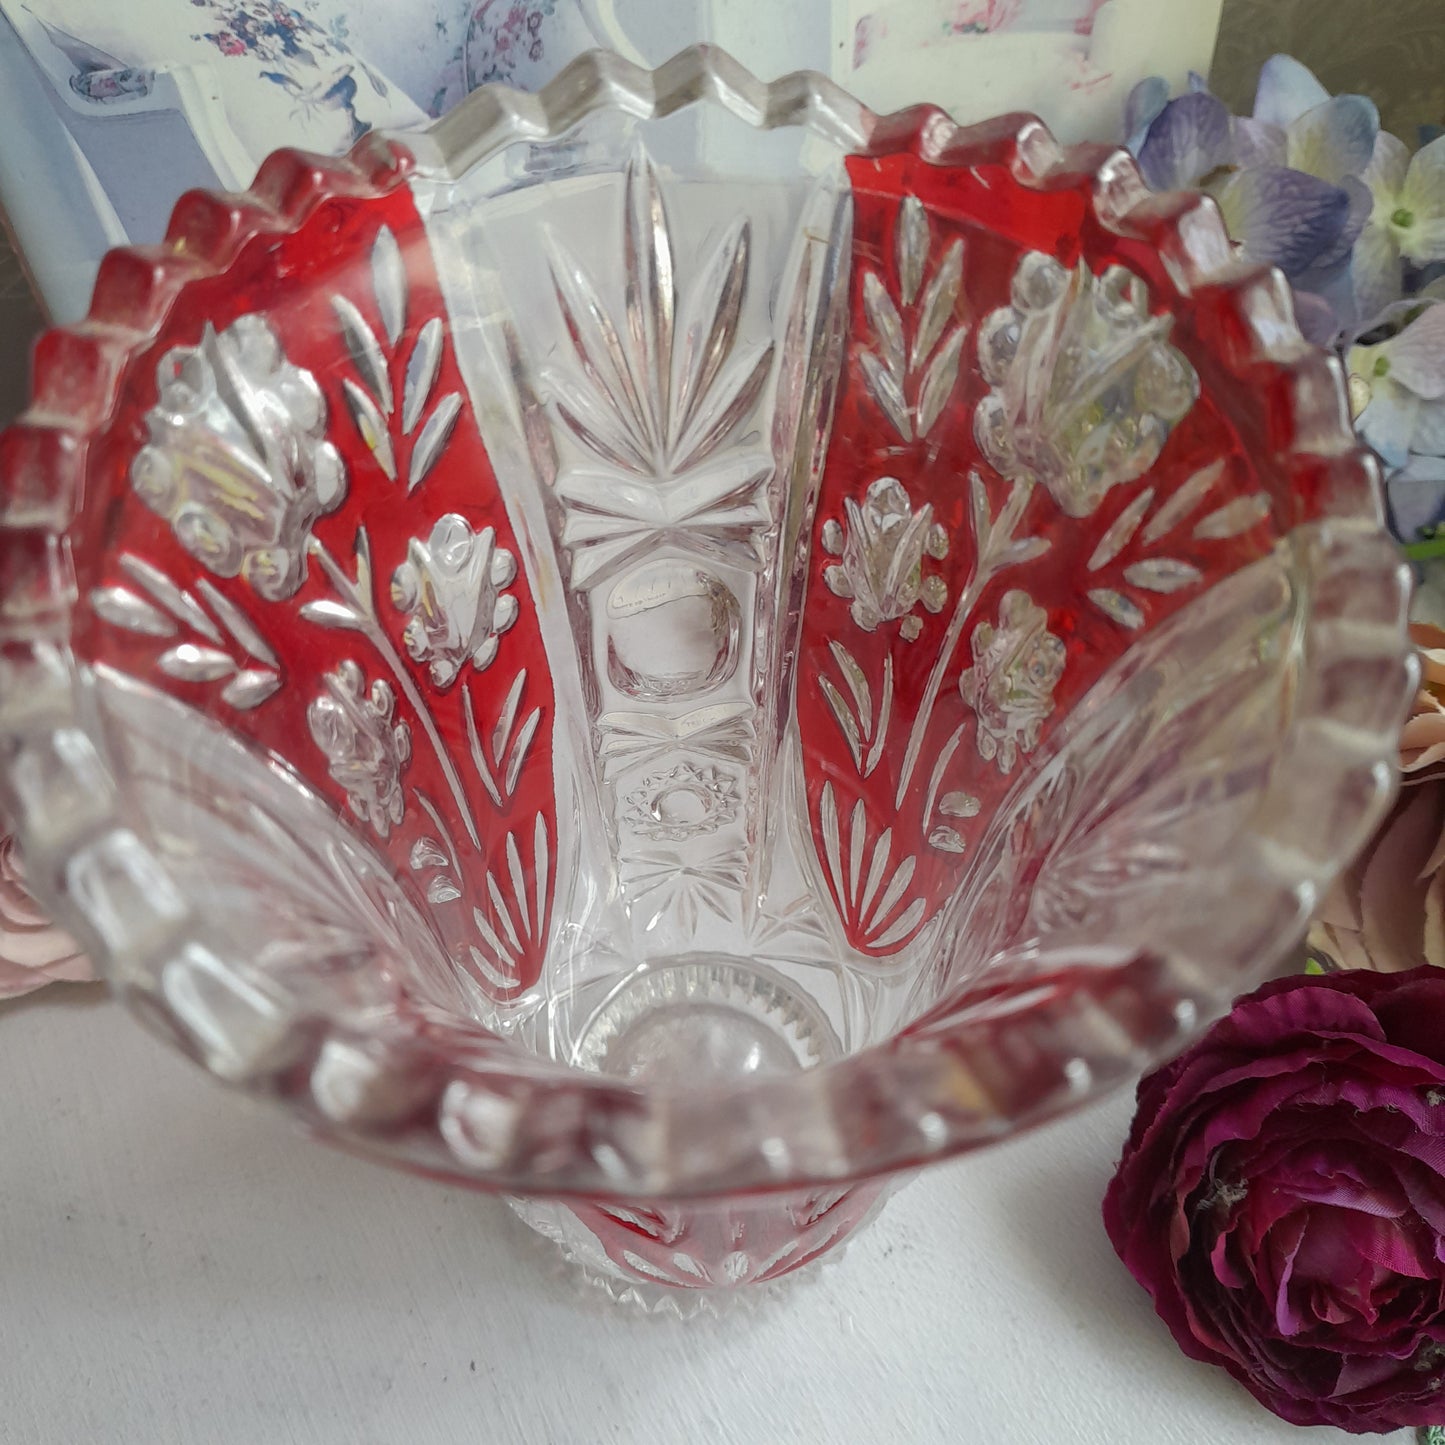 Anna Hutte Bleikristall Ruby Red & Crystal Vase With Flowers Sawtooth Rim